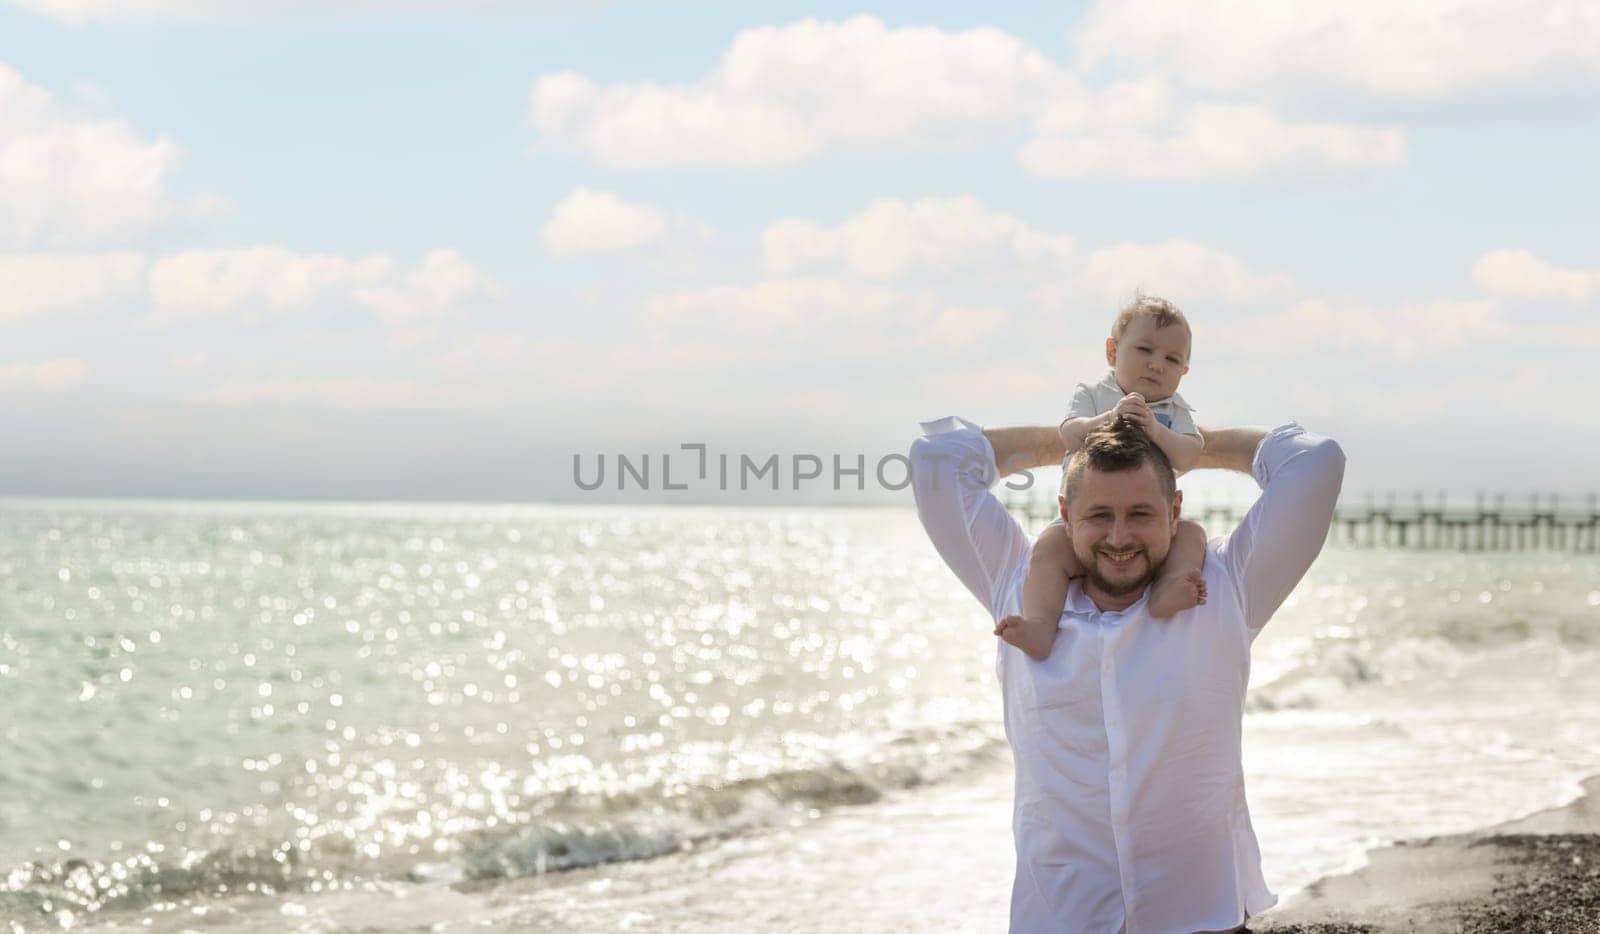 Happy father on vacation - smiling man holding his little baby son on his shoulders. Portrait